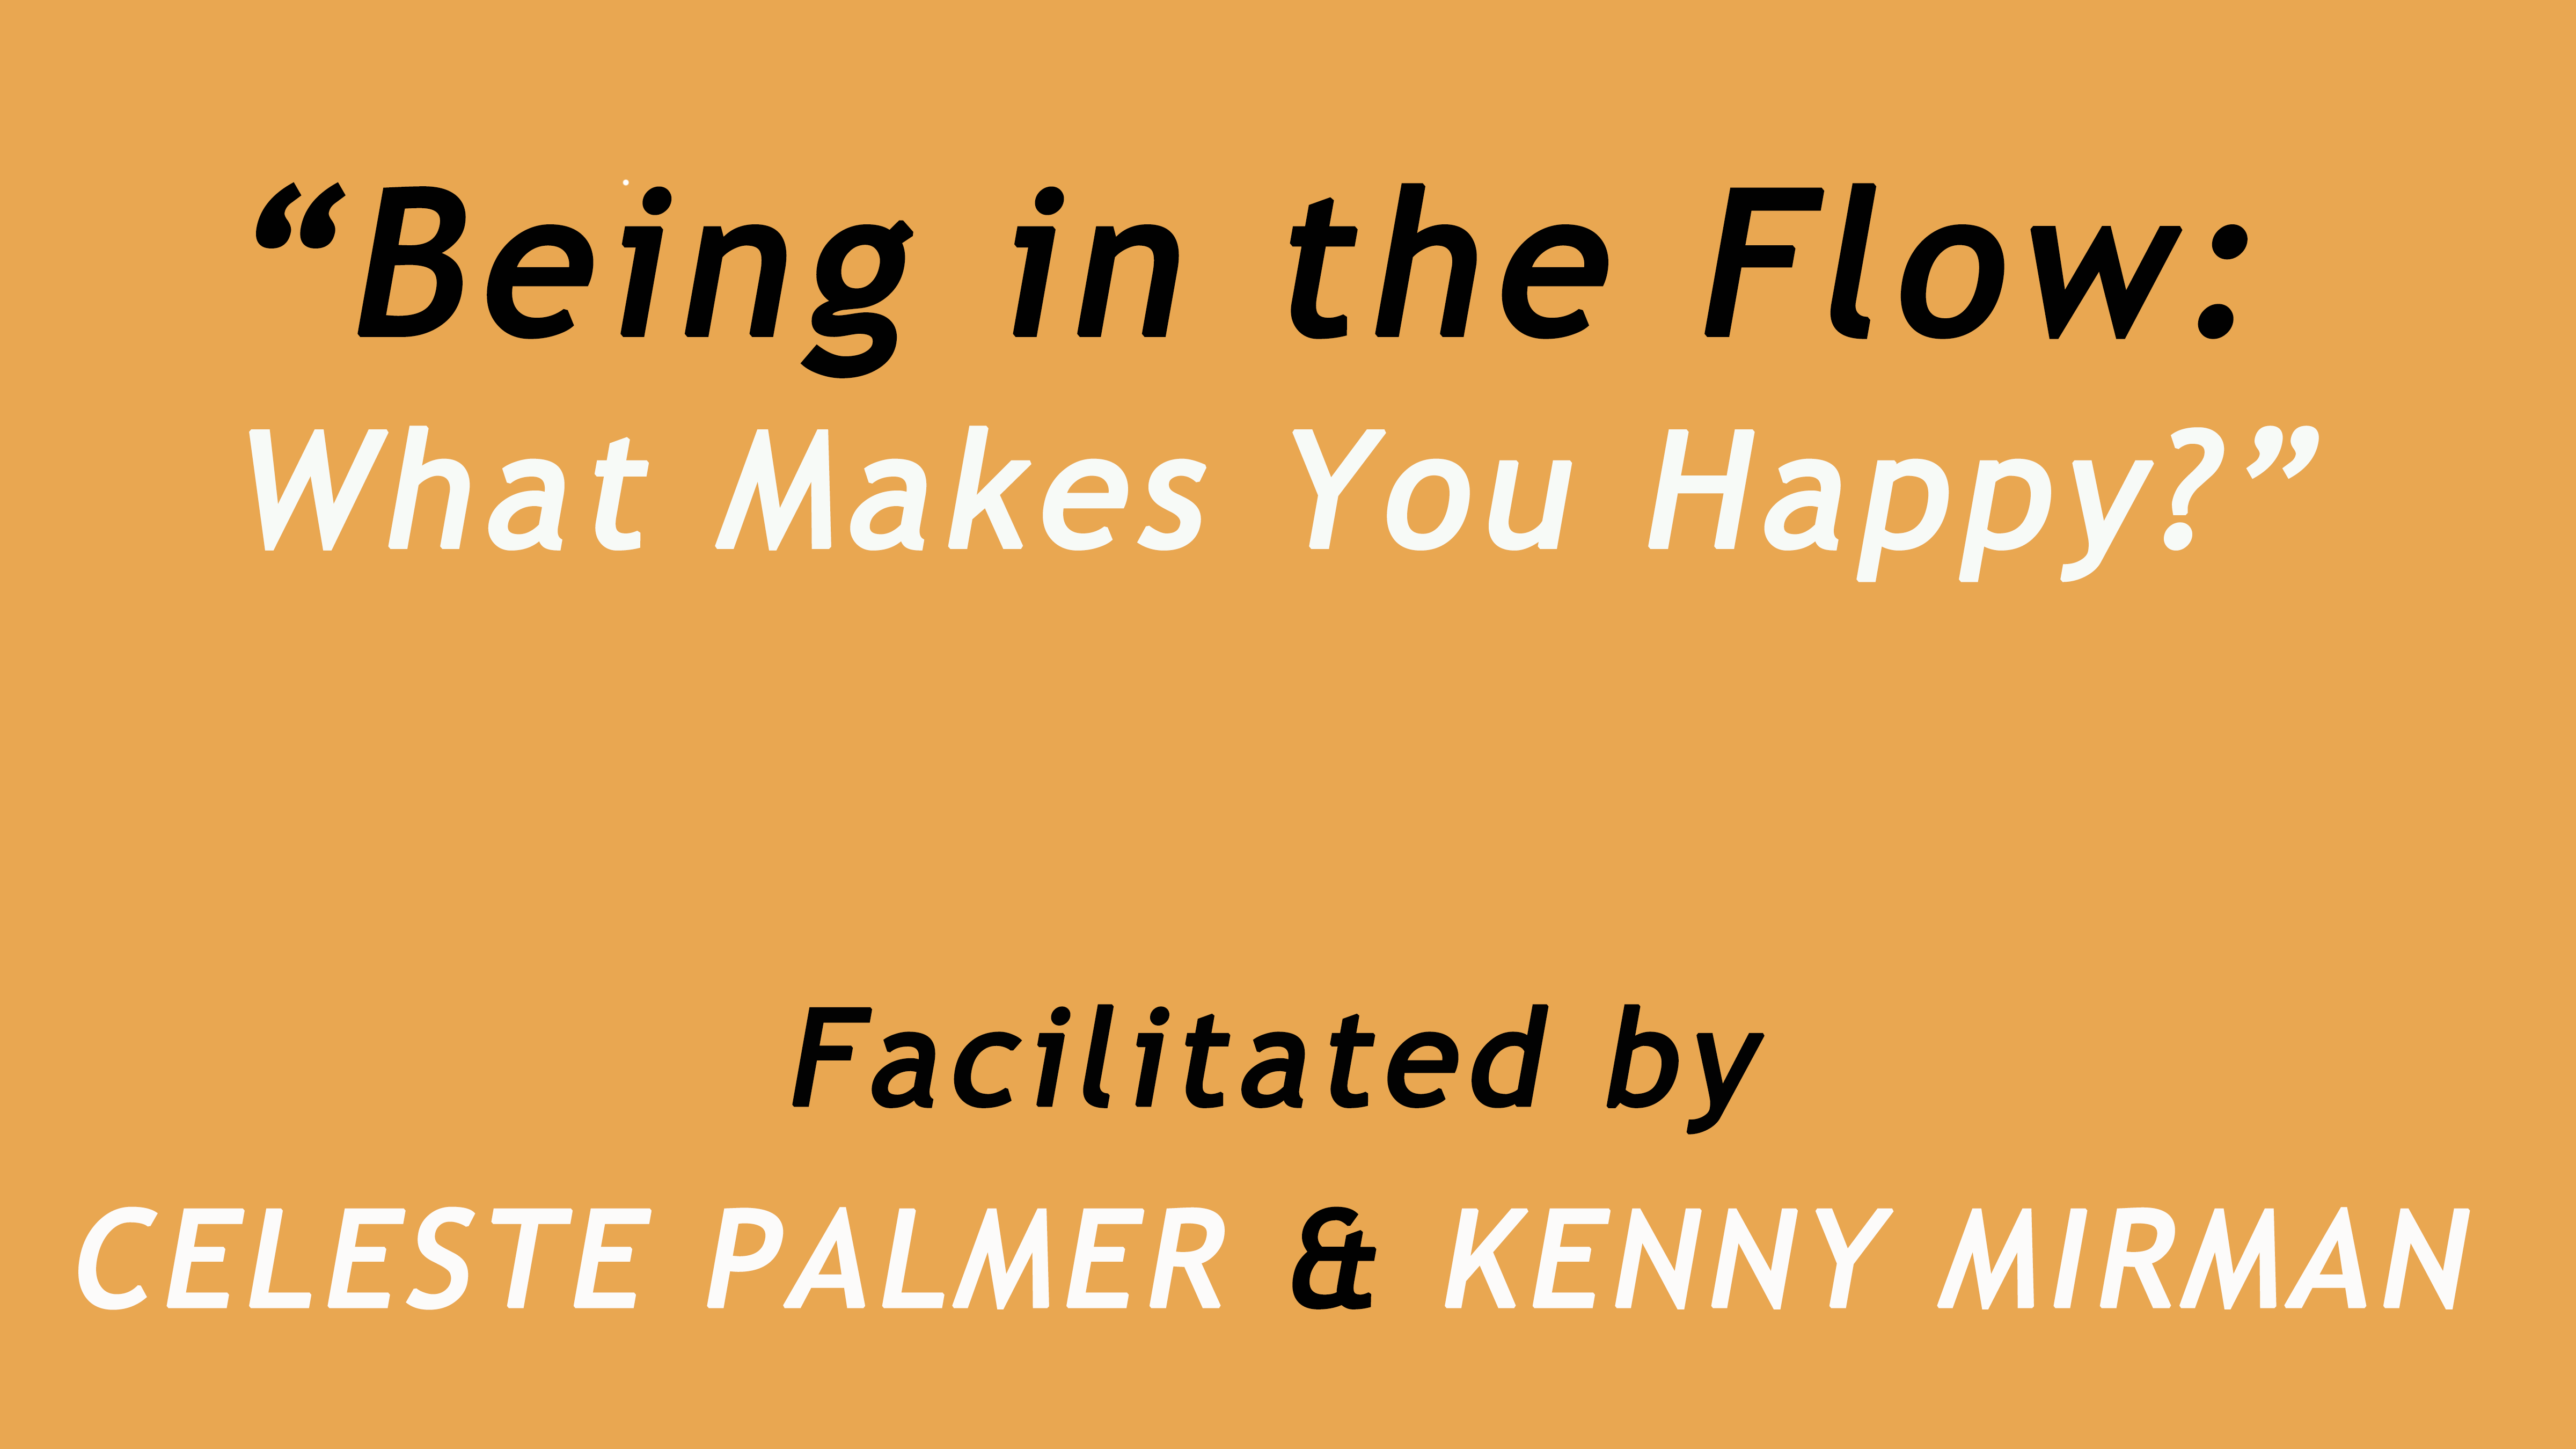 Being In the Flow. Facilitated by Celeste Palmer and Kenny Mirman